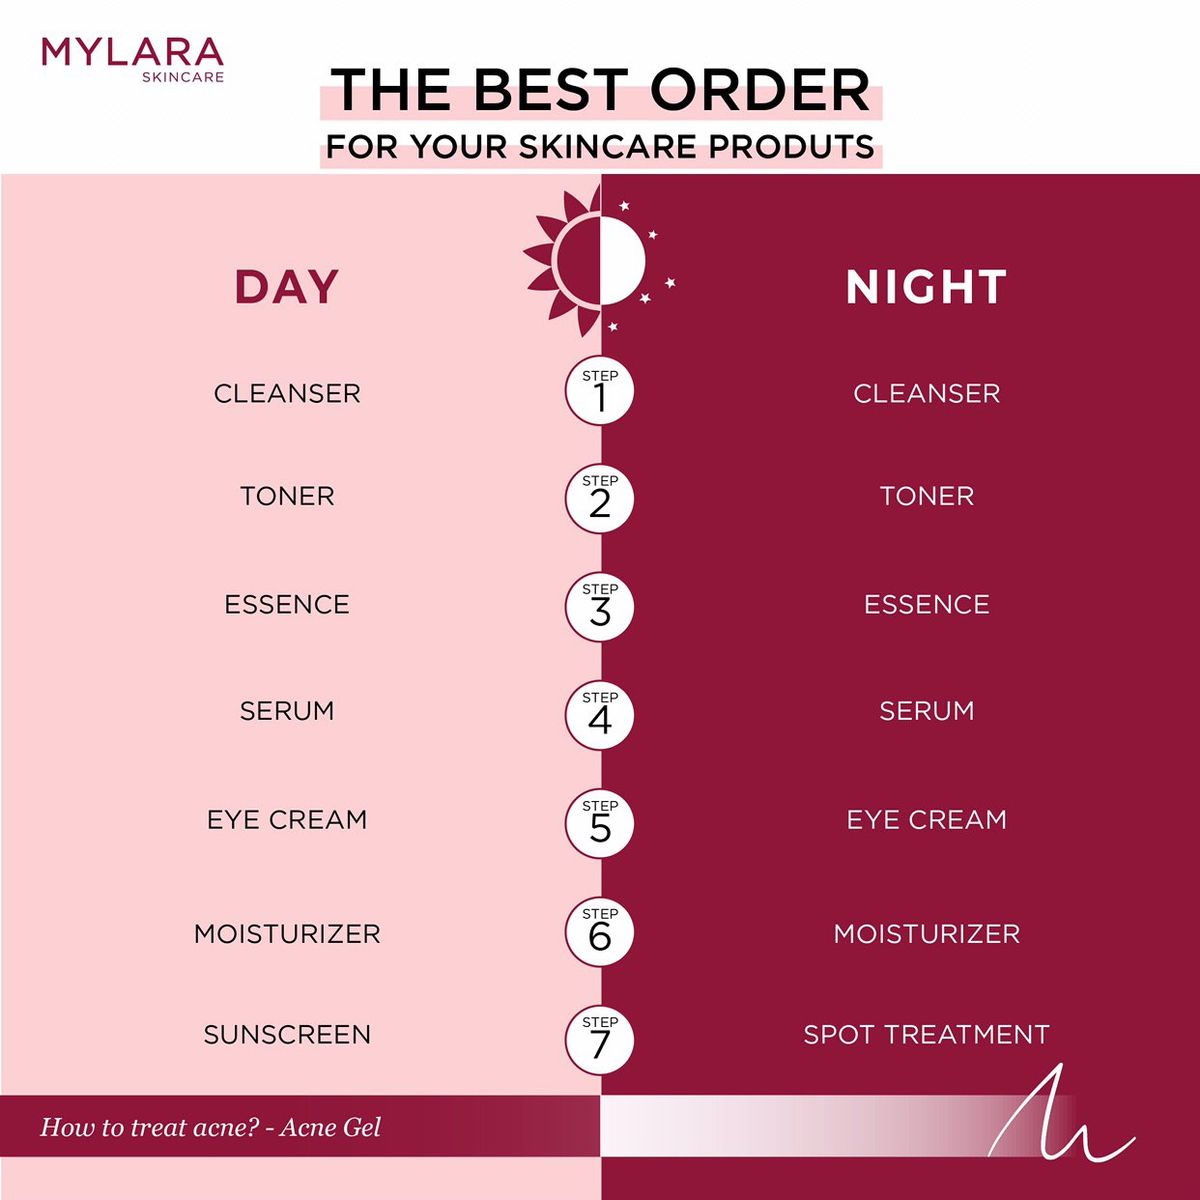 THE BEST ORDER FOR YOUR SKINCARE PRODUCTS